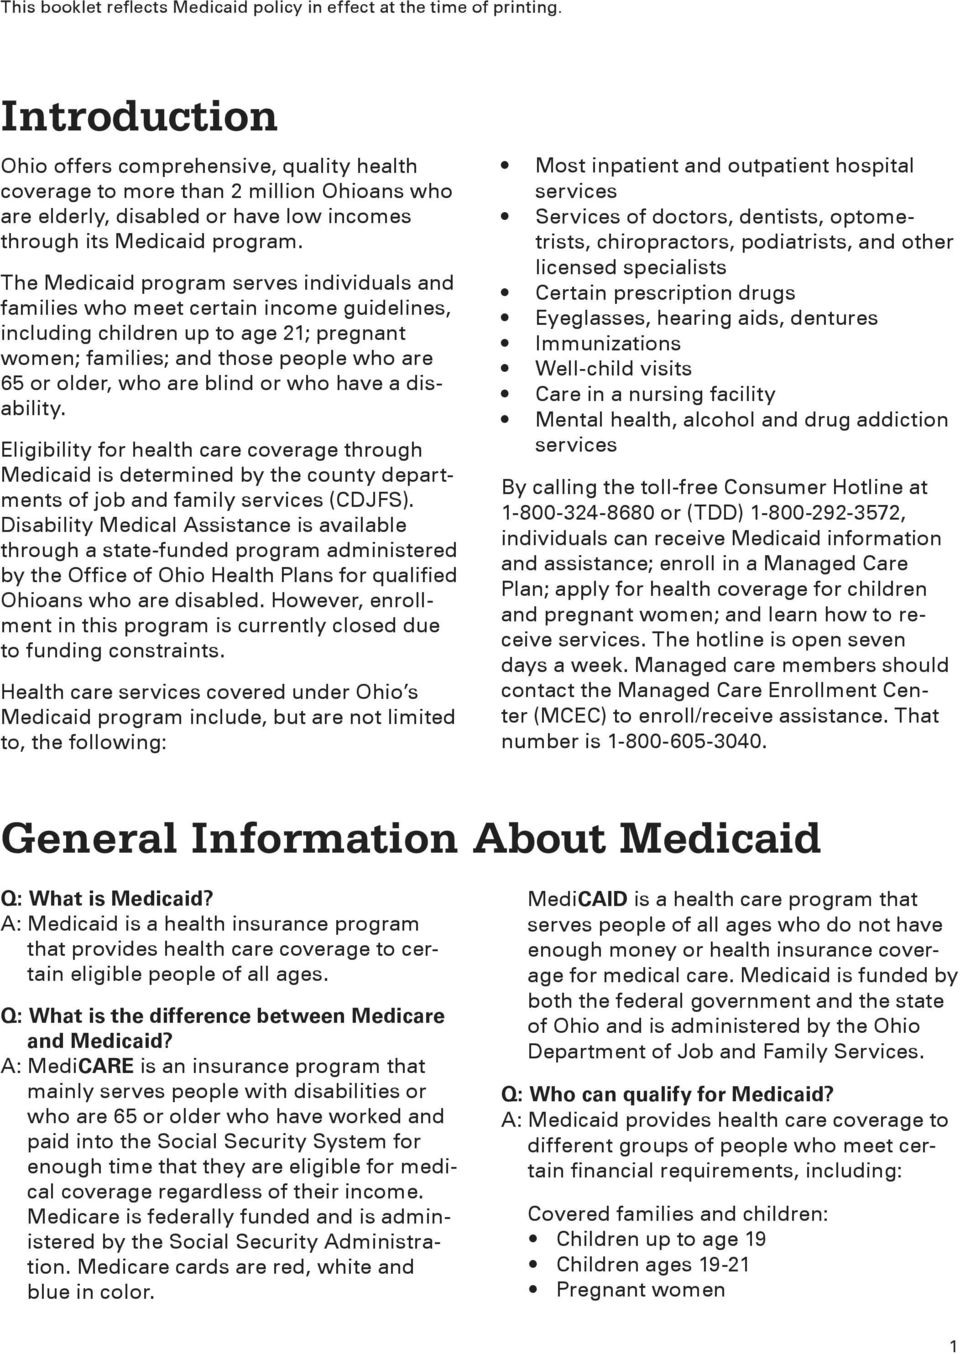 How do i know if my medicaid application is approved